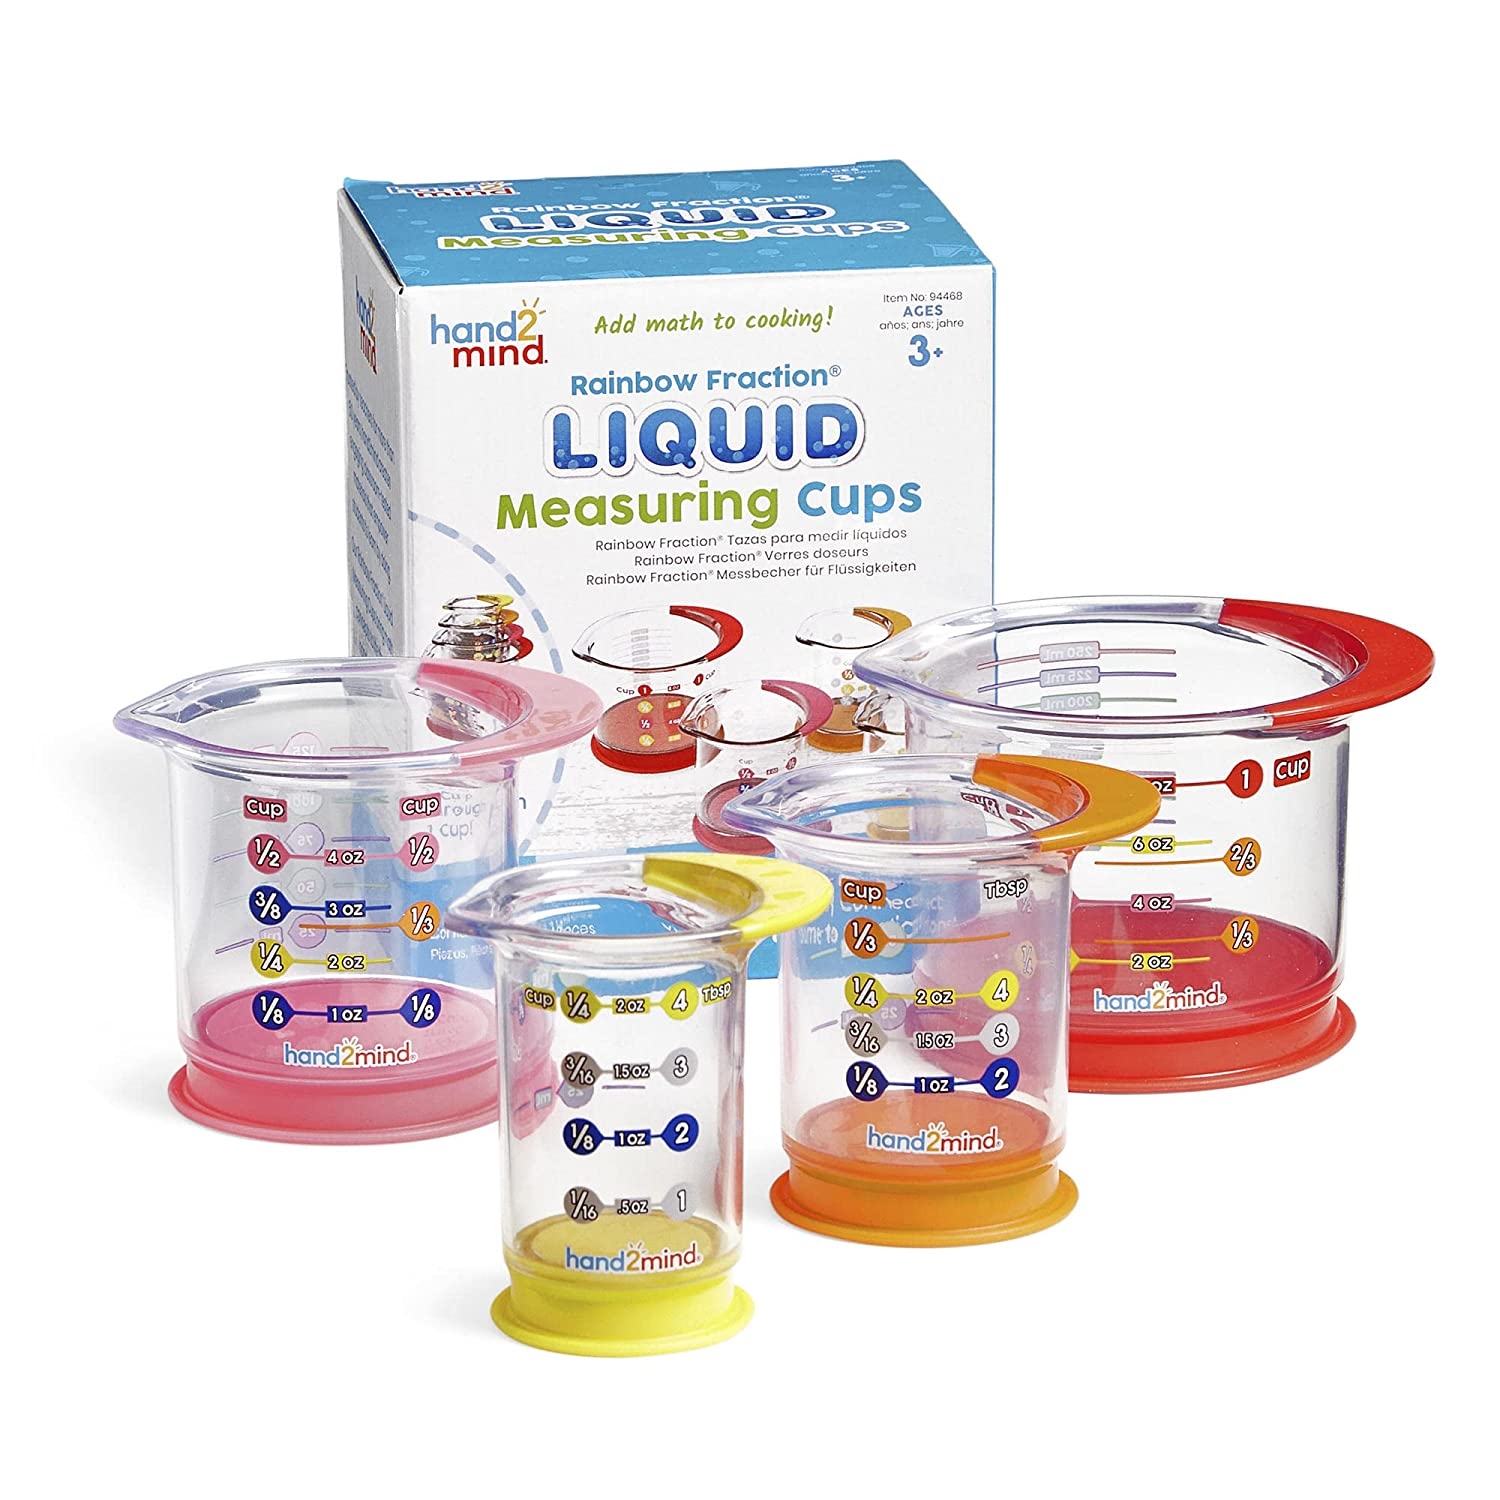 hand2mind Rainbow Fraction Liquid Measuring Cups, Fraction Manipulatives, Kids Measuring Cups, Baking Supplies For Kids, Unit